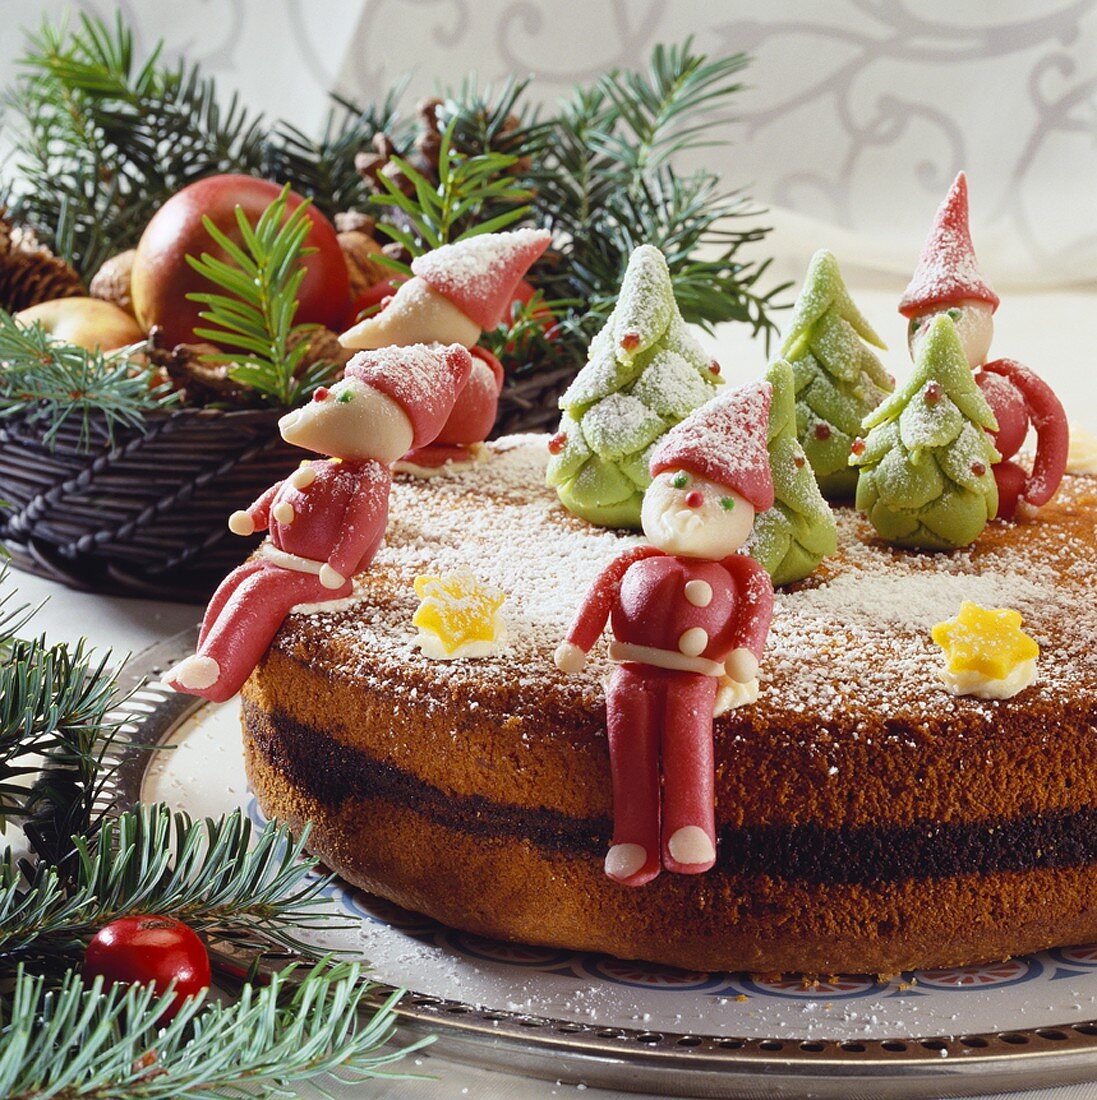 Poppy seed cake decorated with Christmassy marzipan figures